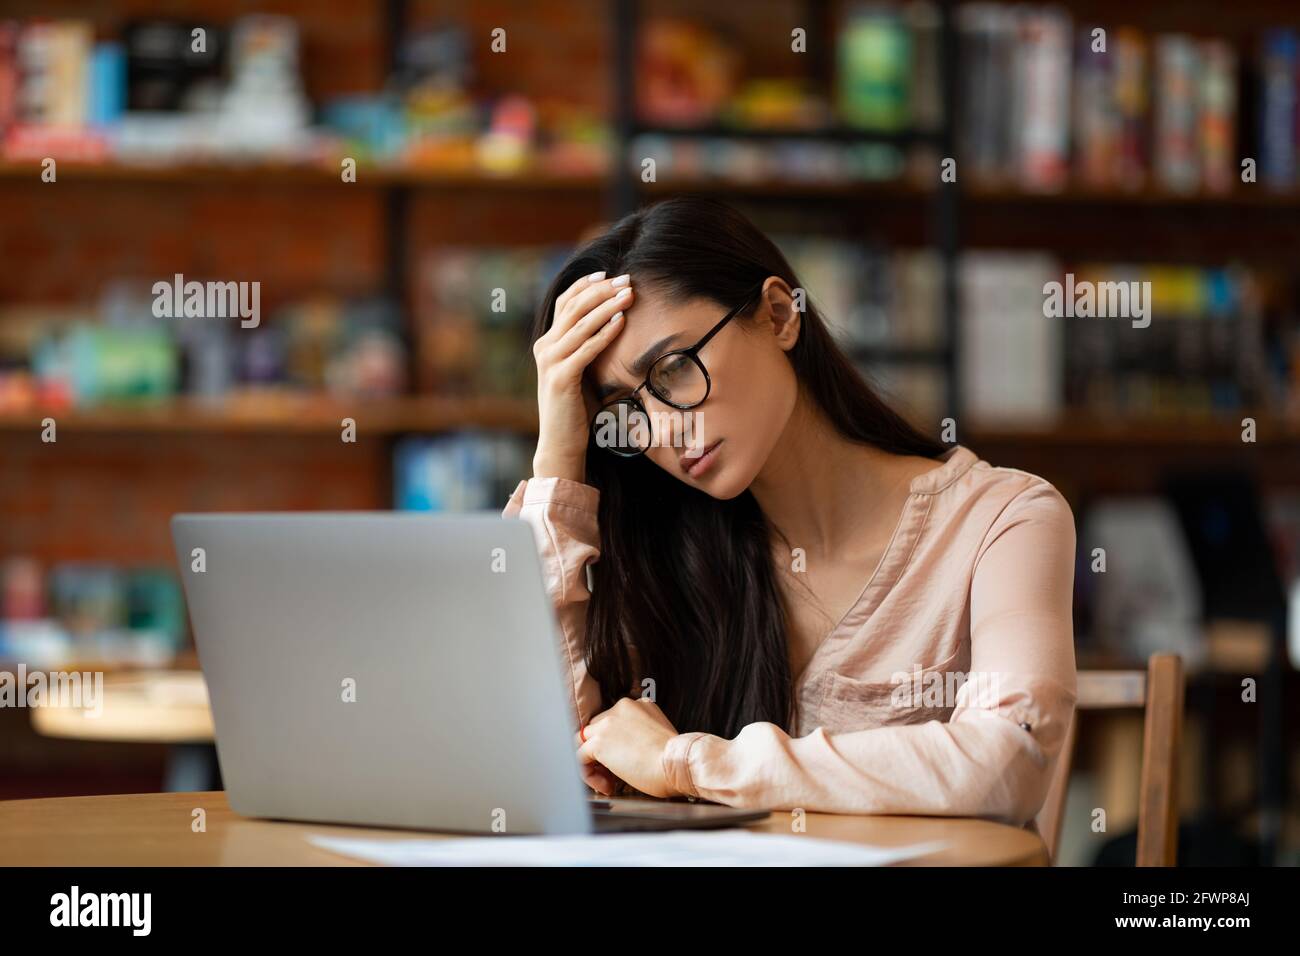 Disappointed arab lady using laptop and having problems, working on computer remotely in cafe, suffering from headache Stock Photo